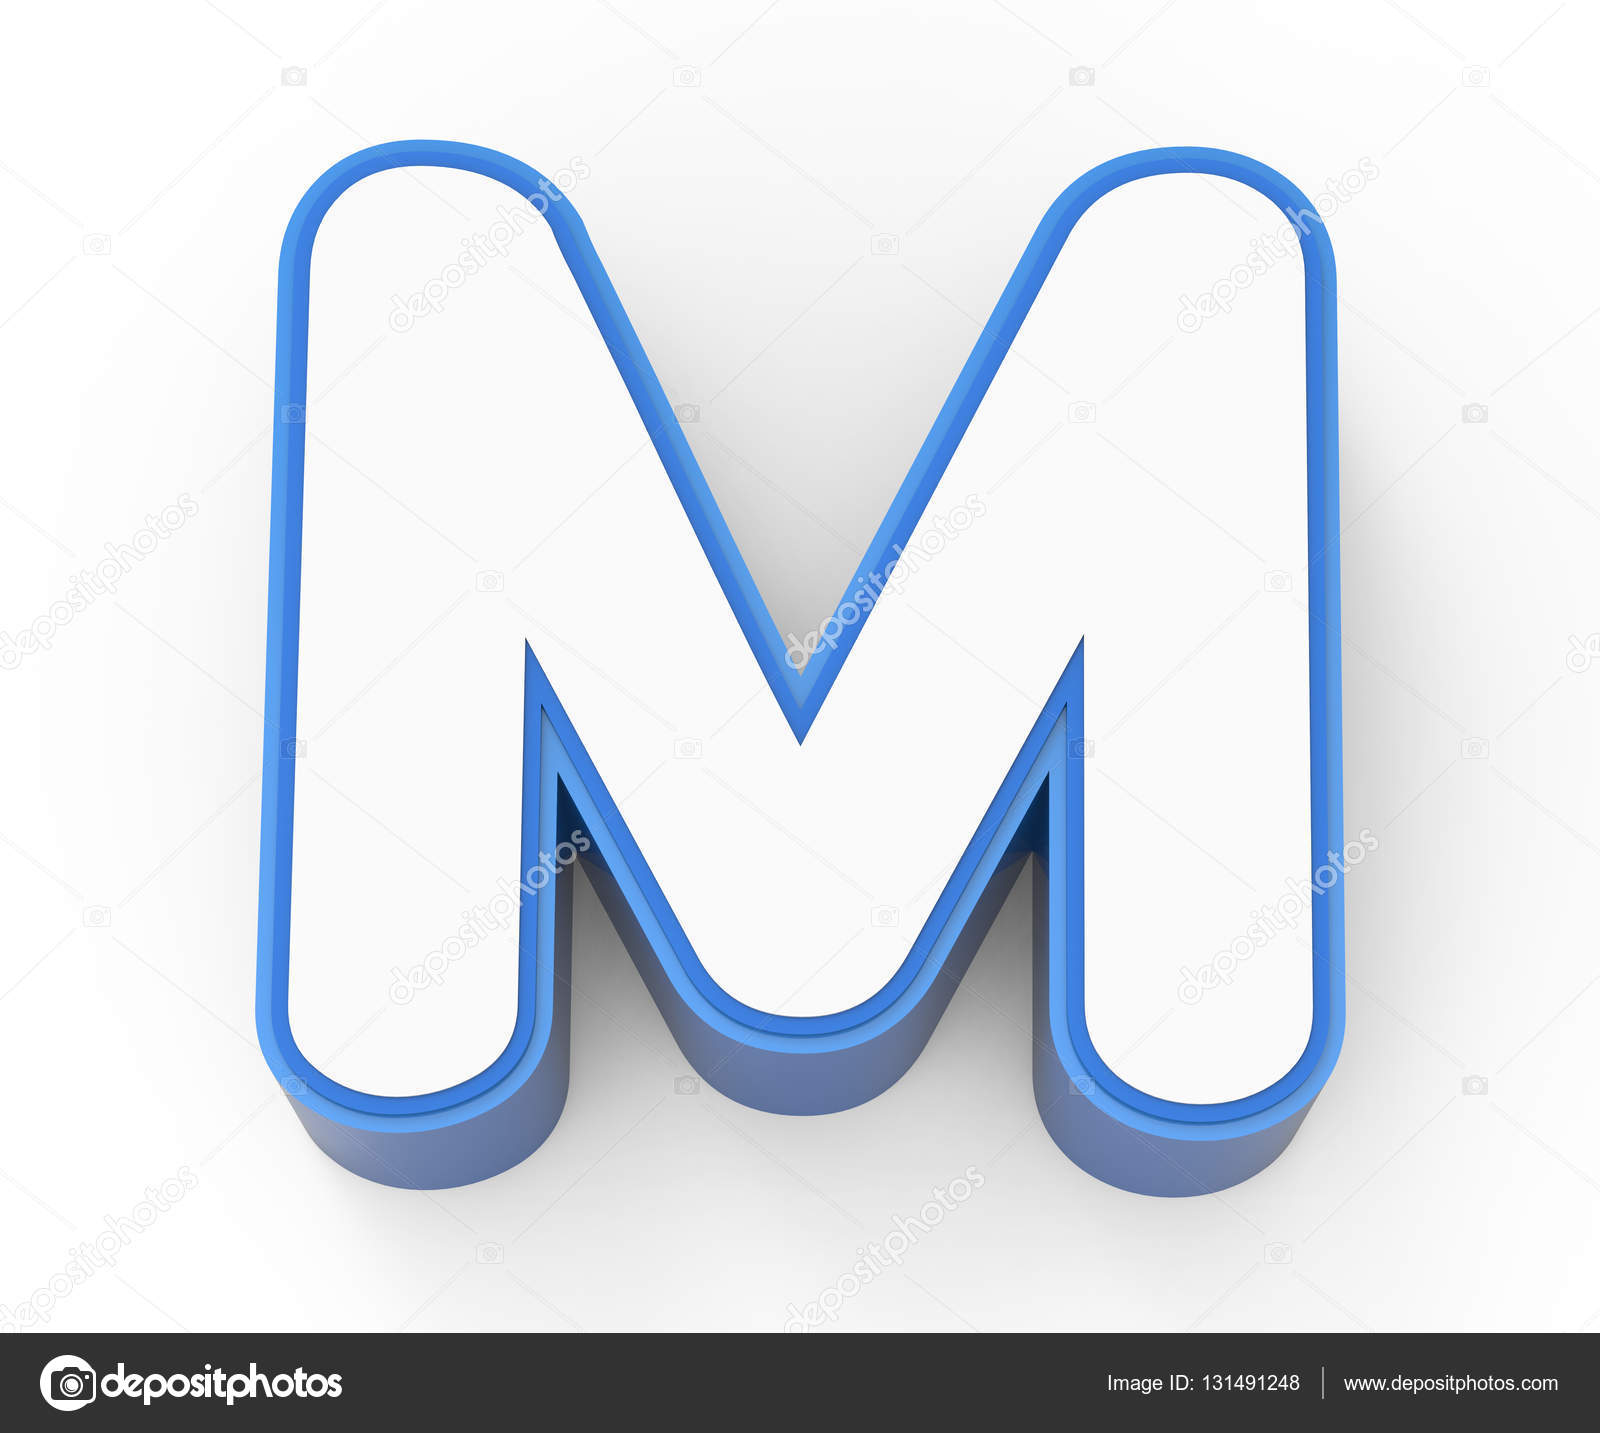 2 971 Letter M Stock Photos Images Download Letter M Pictures On Depositphotos